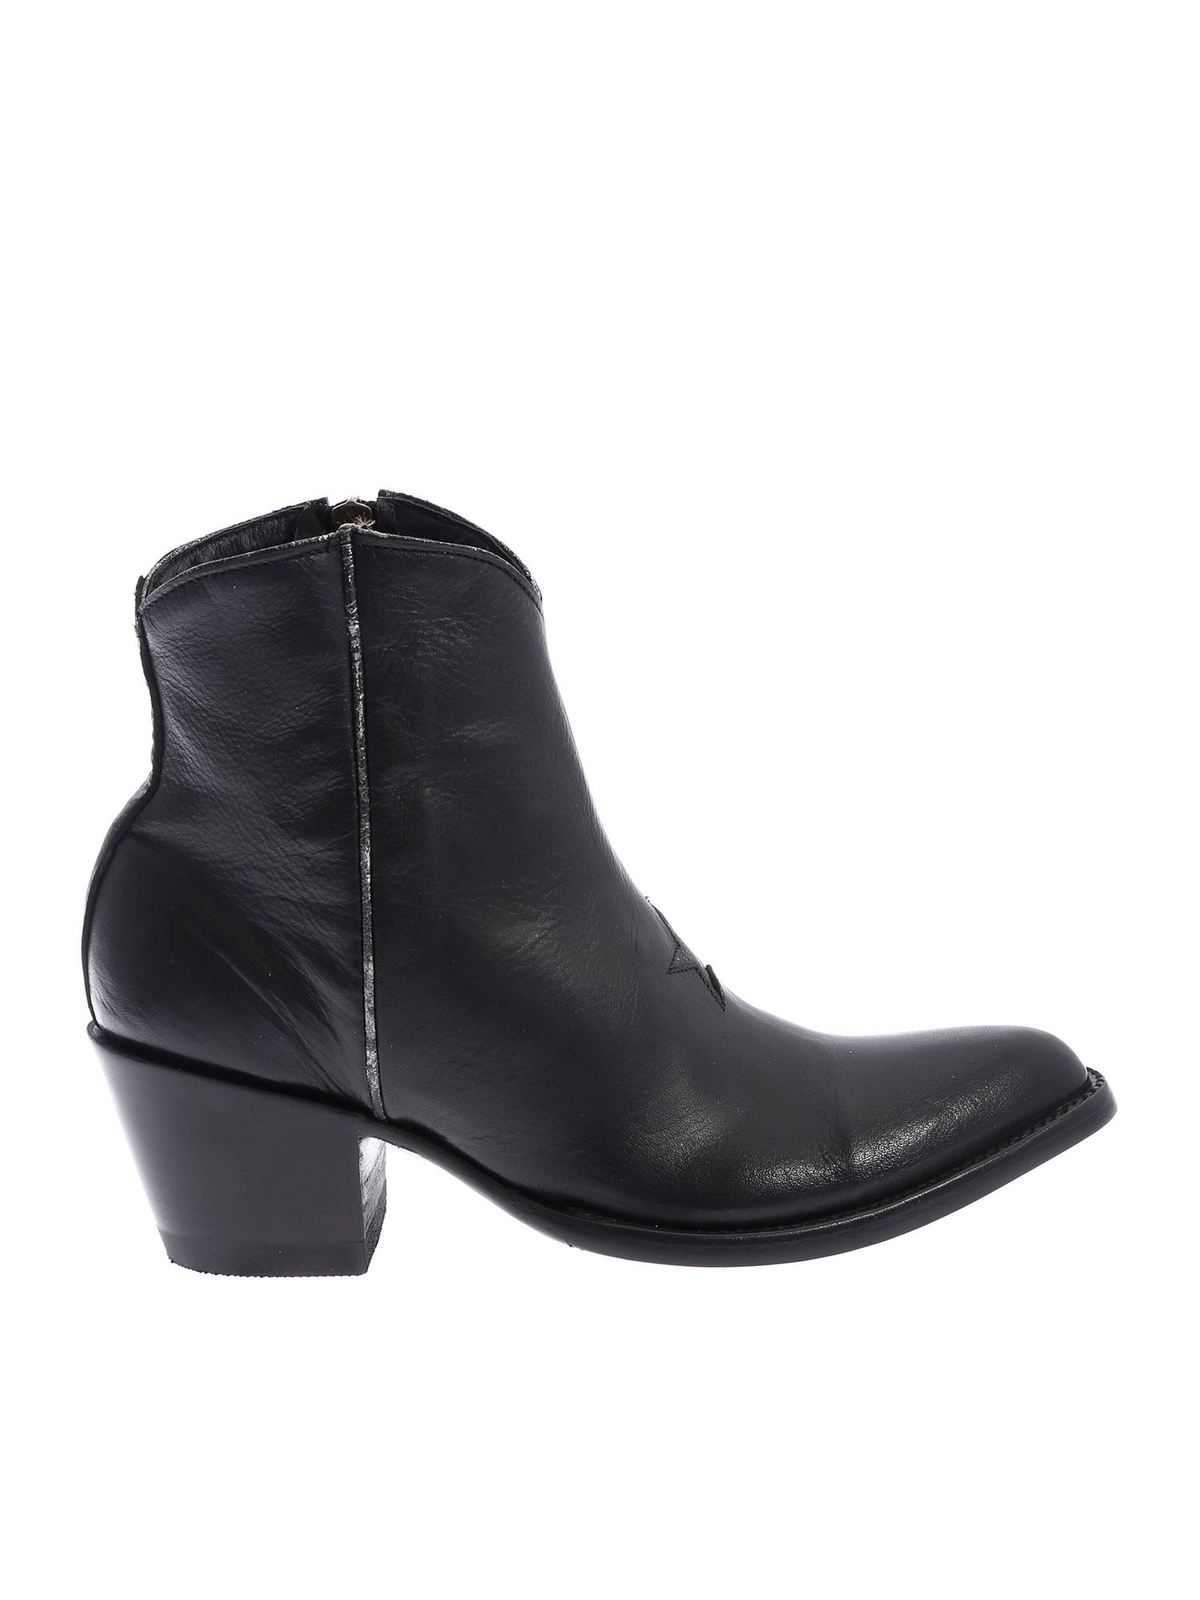 MEXICANA STAR 5 TEXAS BOOTS IN BLACK